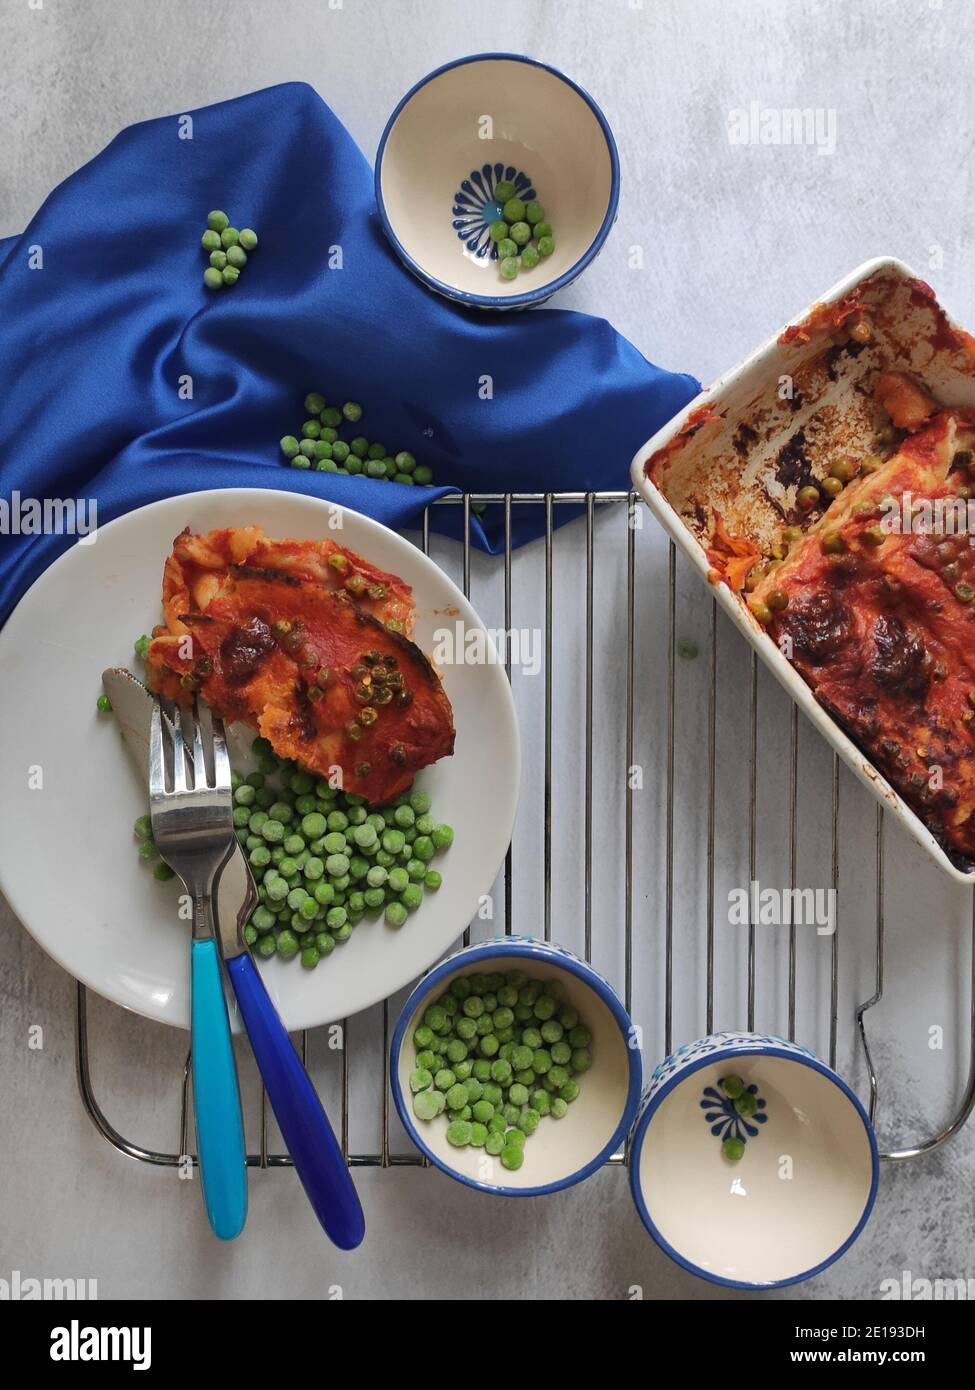 Green peas red lasagna in a blue dining set Stock Photo